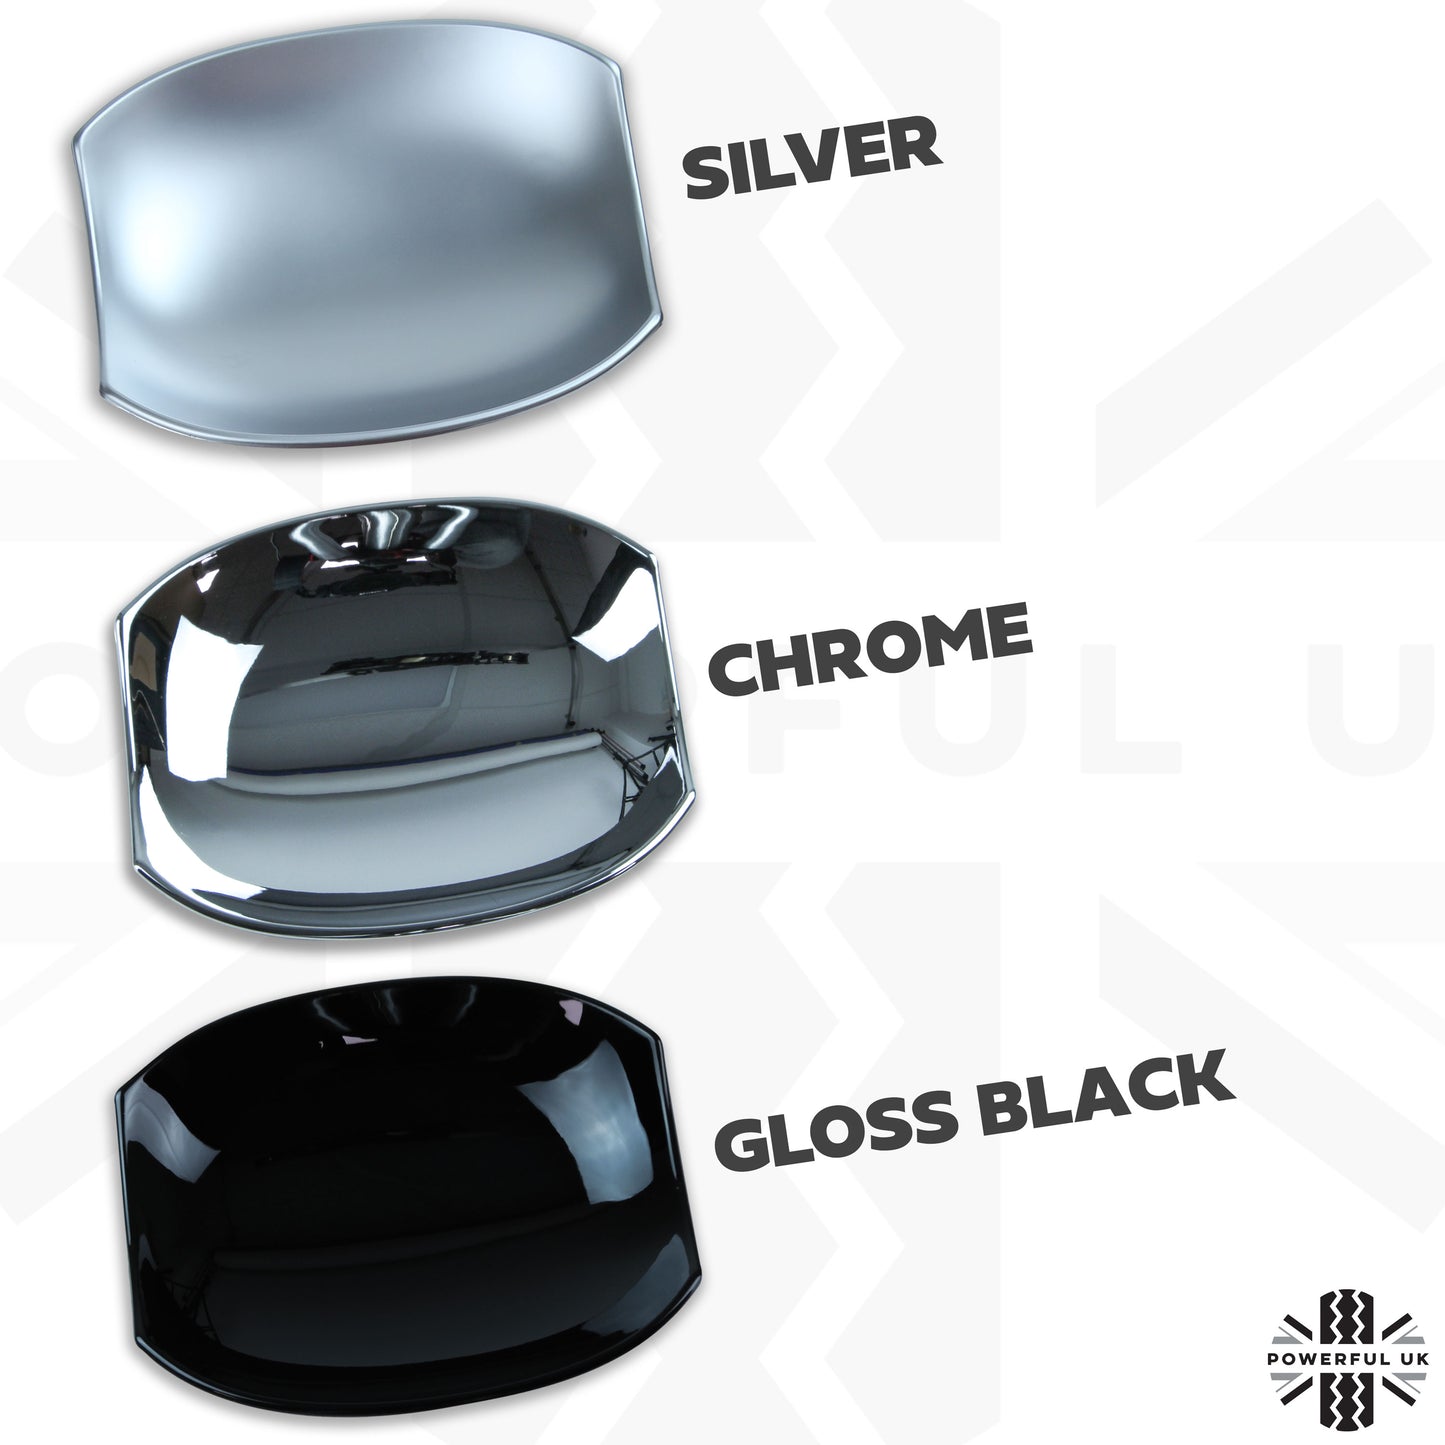 Door Handle Scuff Plates (4 pc) - Silver - for Land Rover Discovery 5